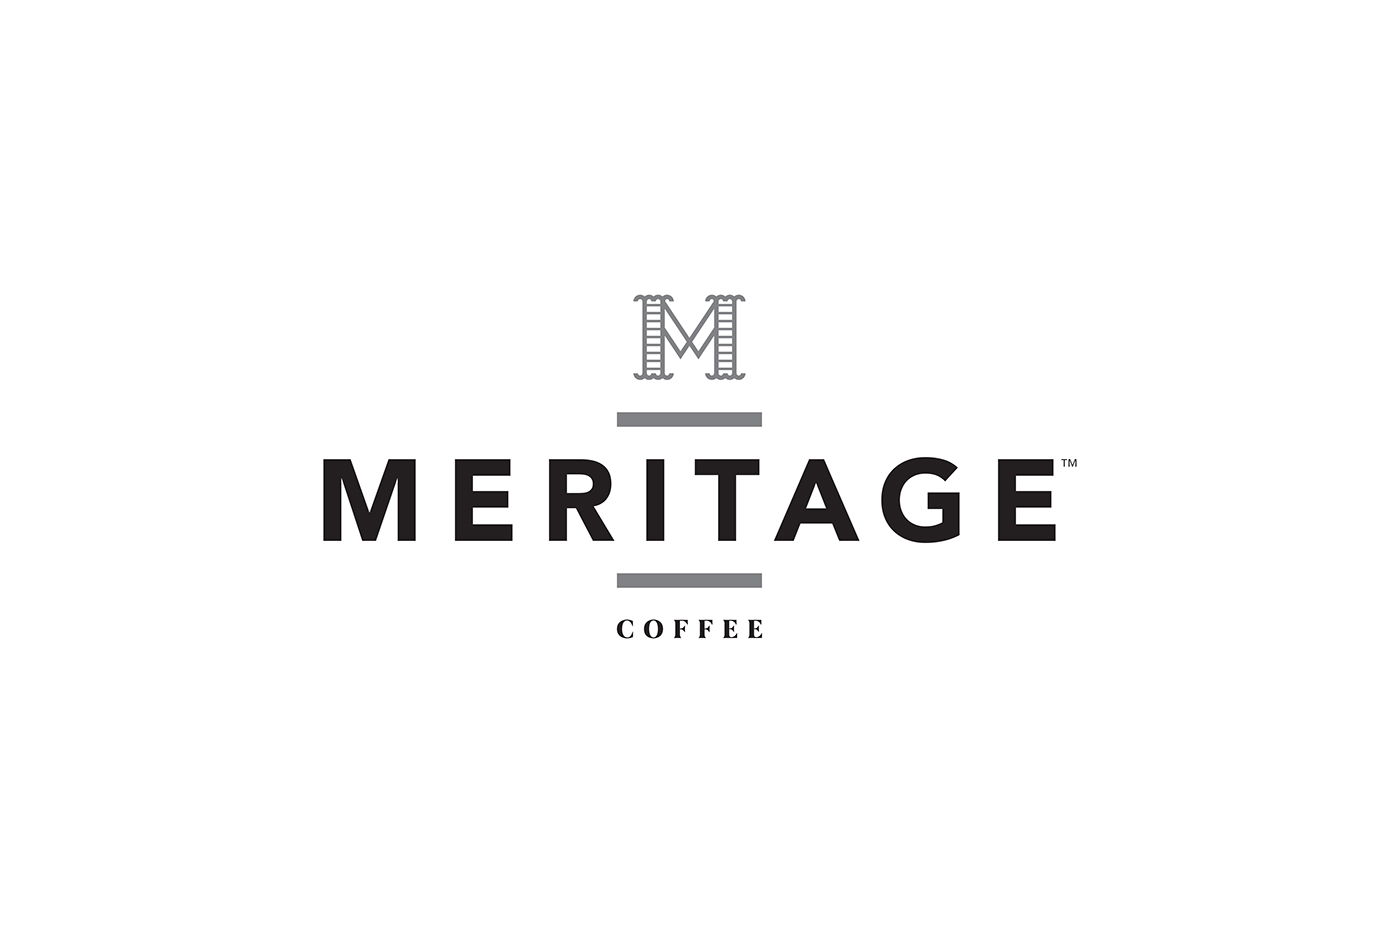 Coffee White Blends meritage elegant exclusive cafe instructions coffee blends modern identity letterpress Business Cards french paper